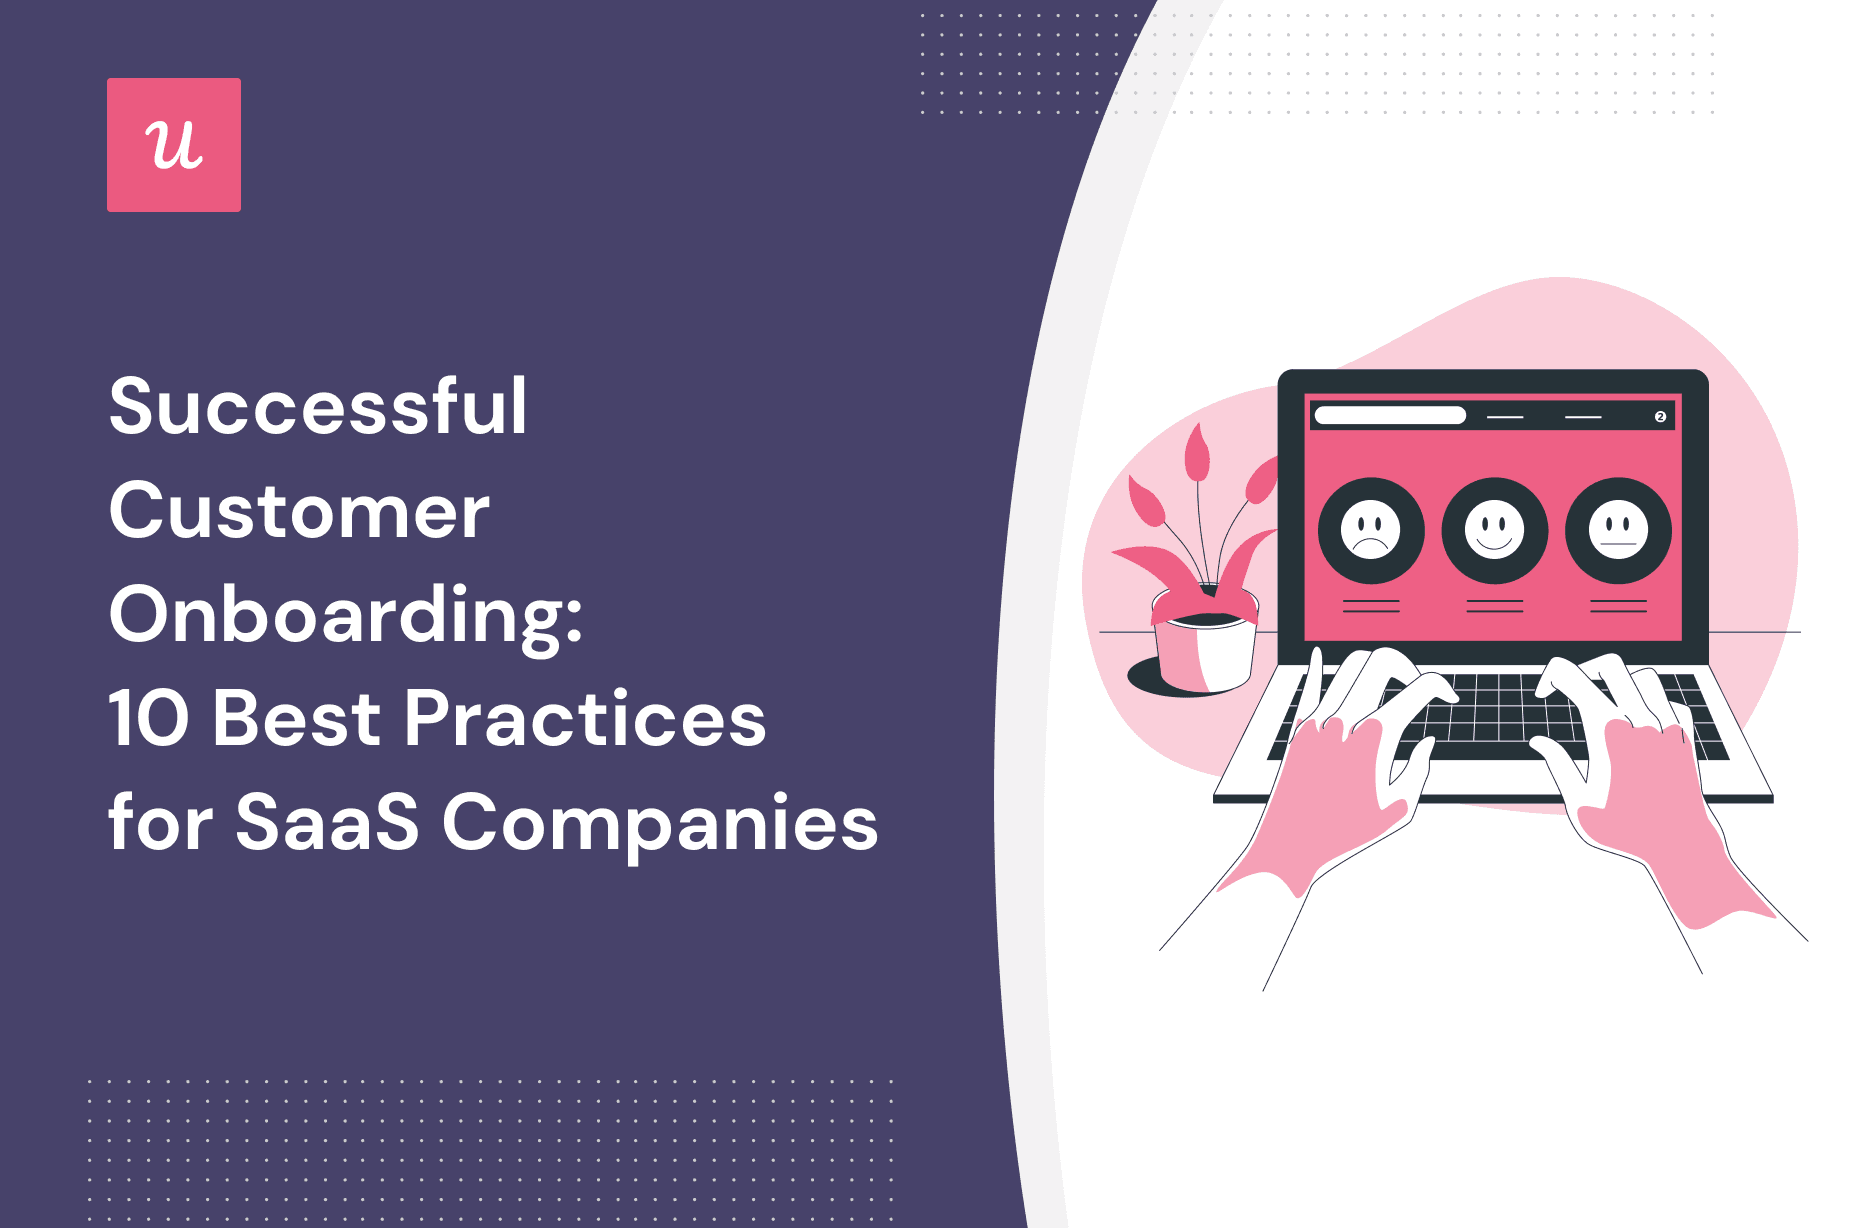 Successful Customer Onboarding: 10 Best Practices for SaaS cover